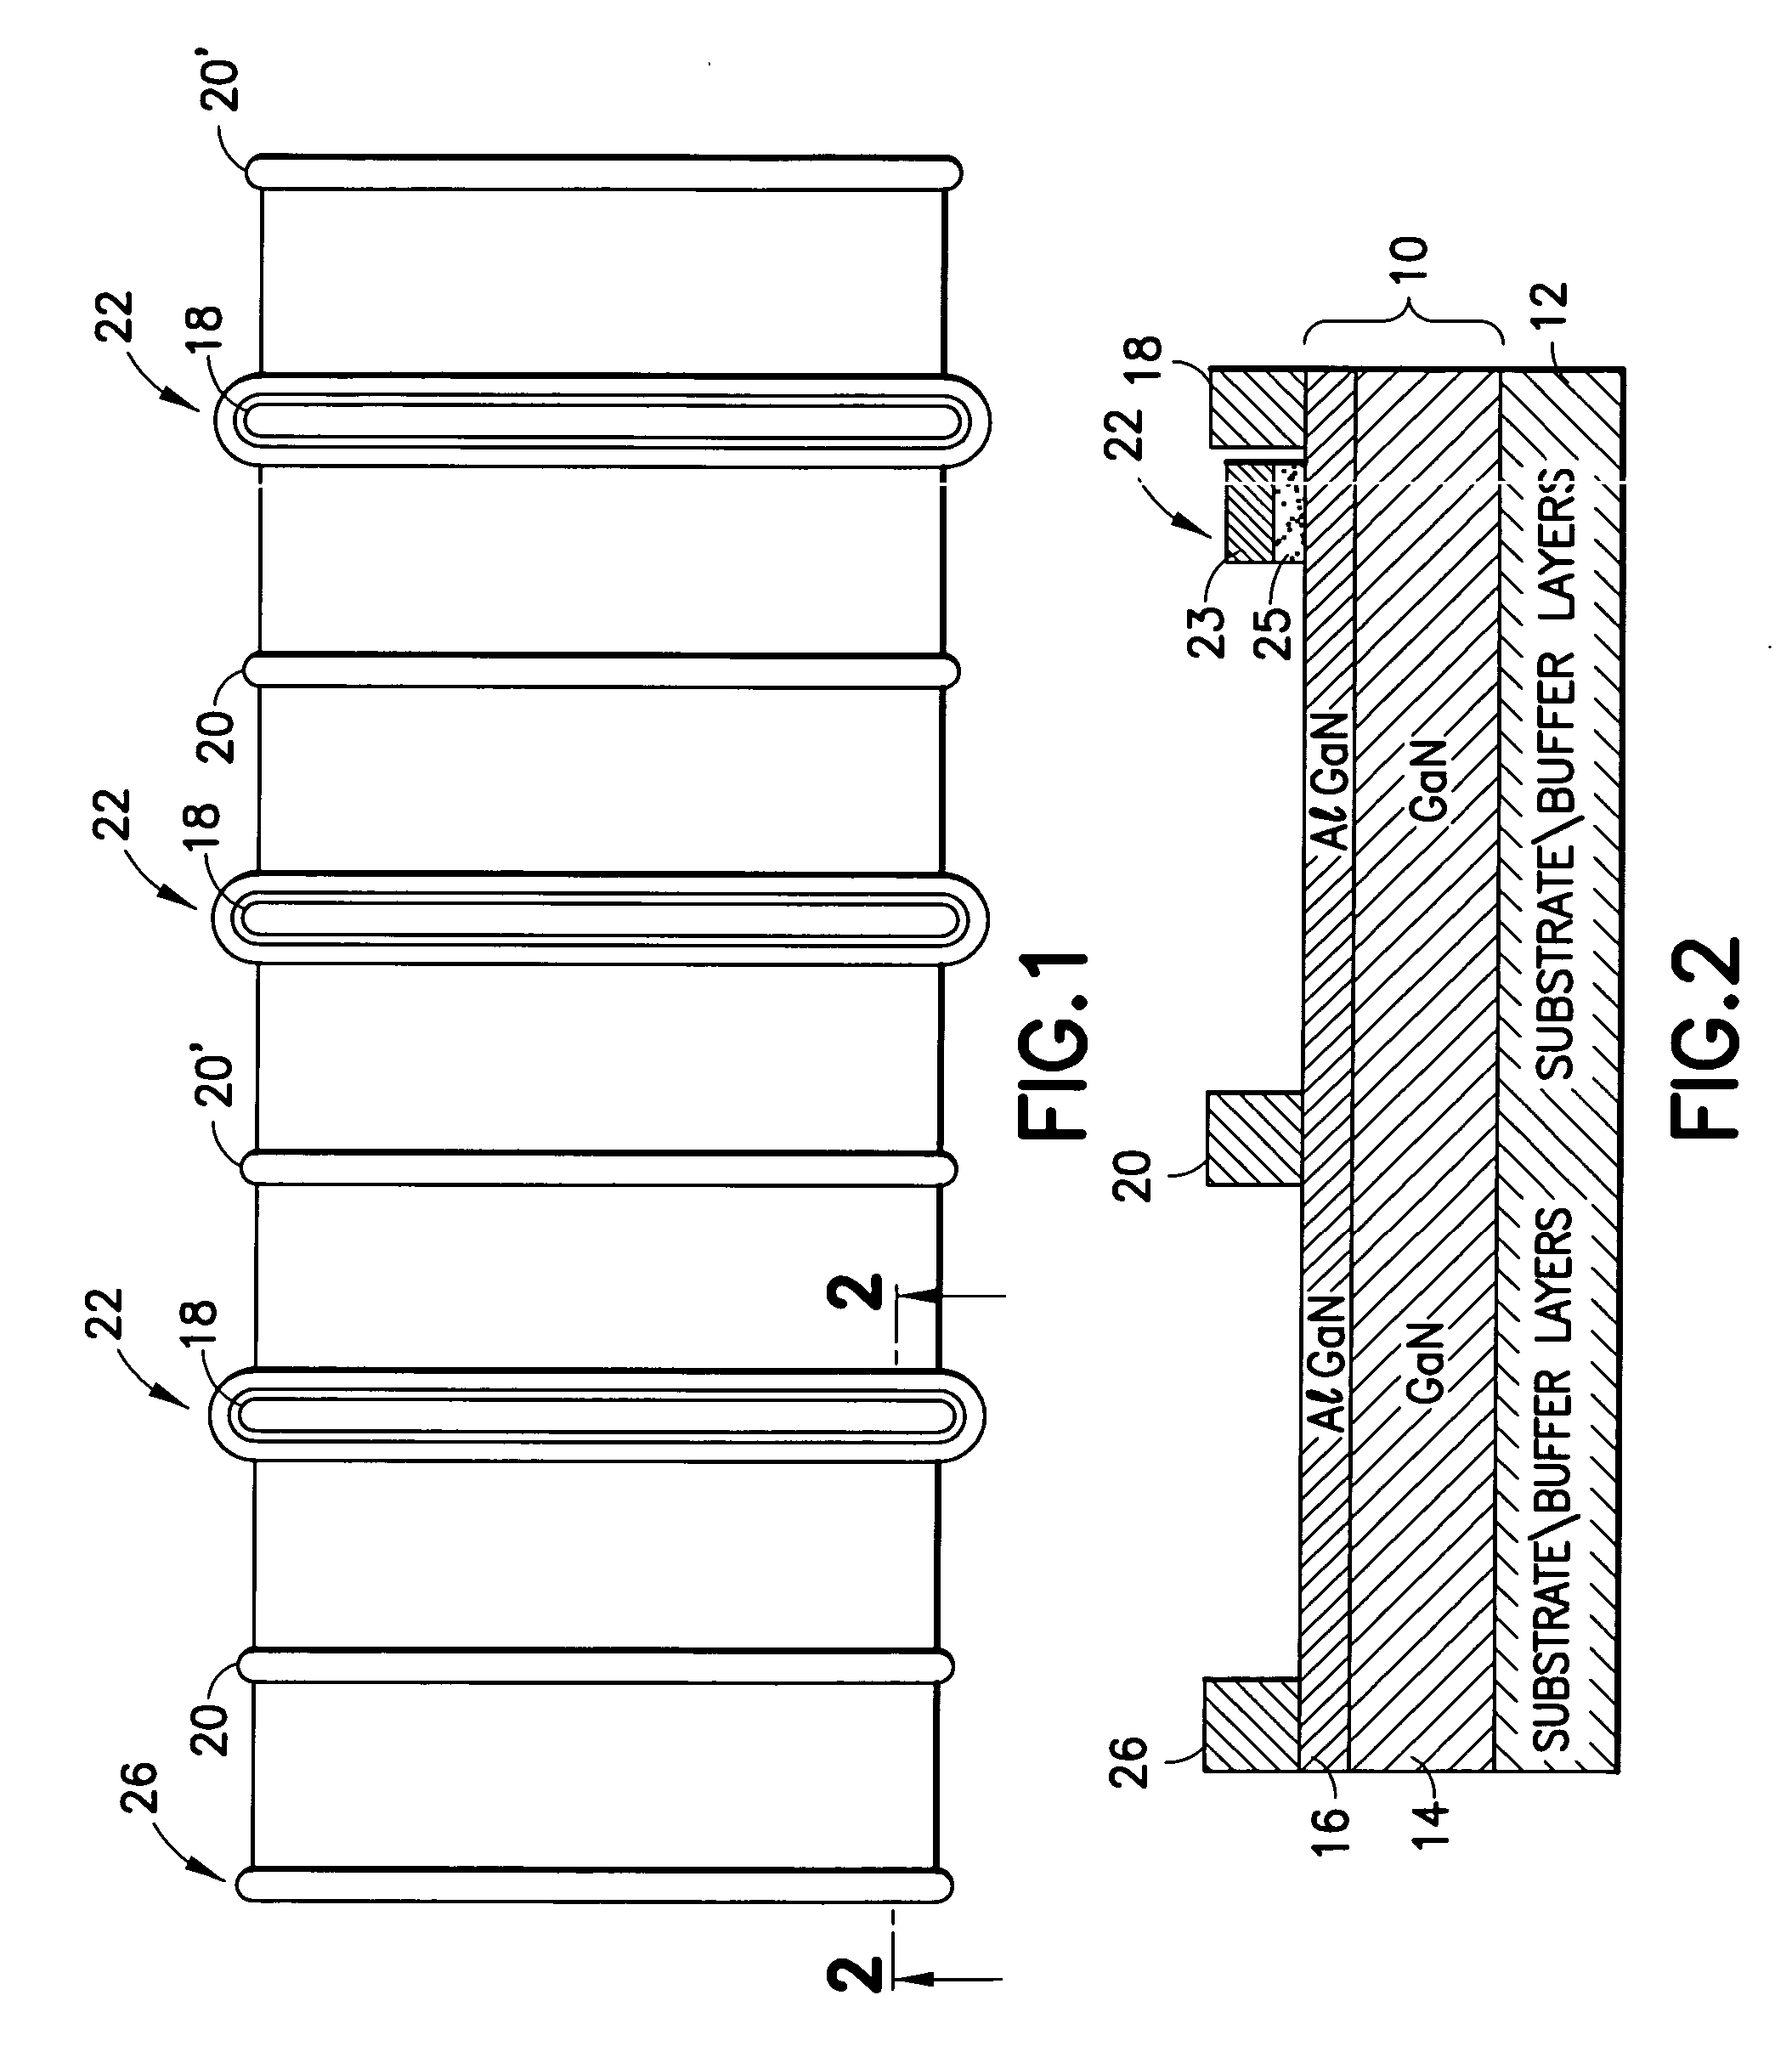 III-nitride integrated schottky and power device